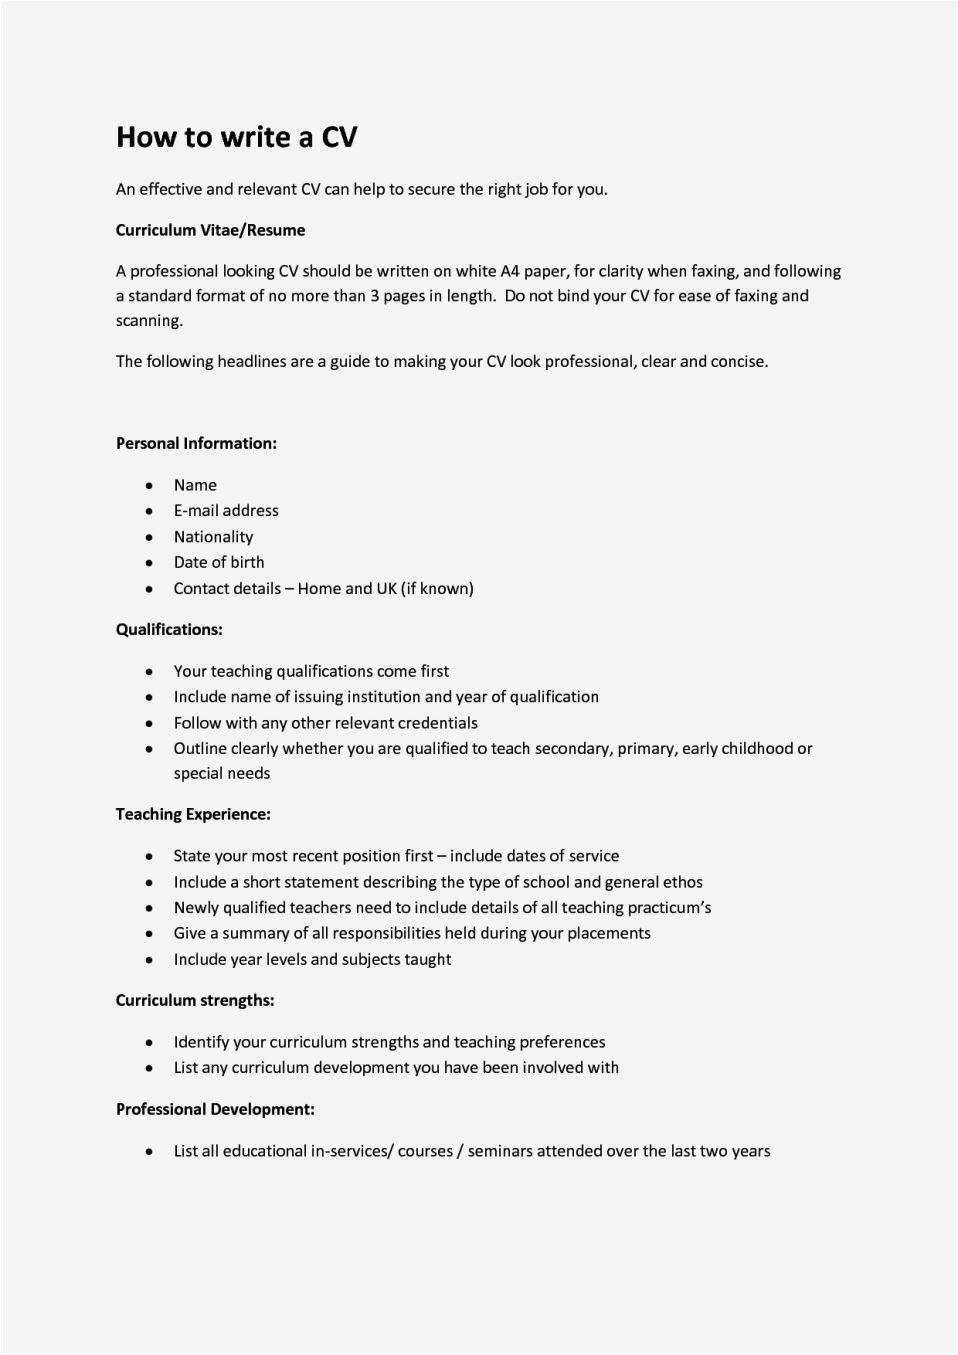 how to write a cv for a 16 year old with no experience uk